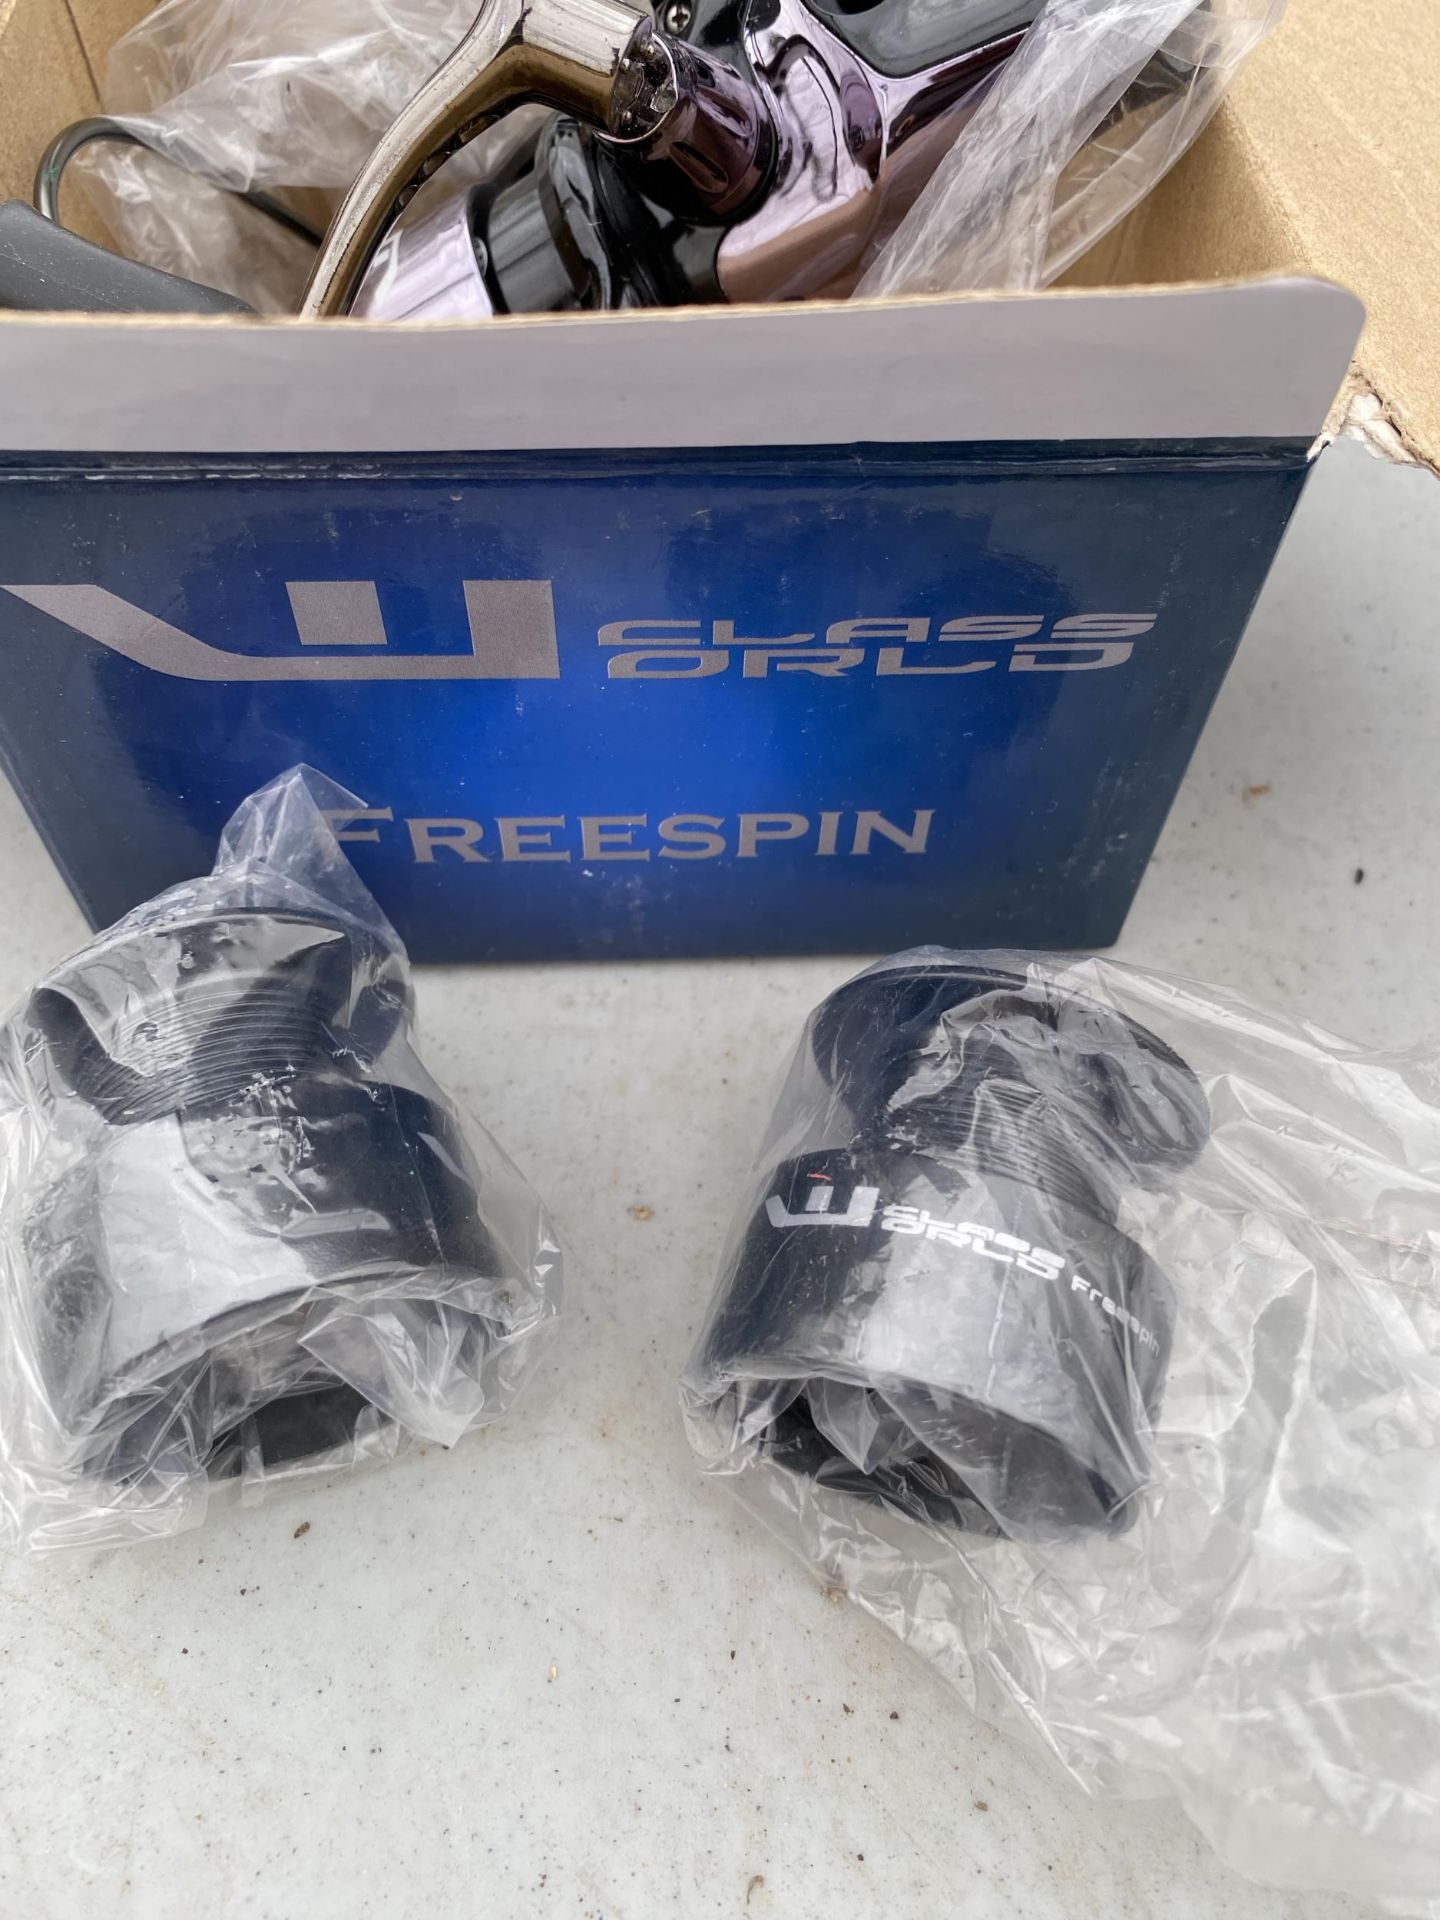 TWO BOXED FREESPIN FISHING REELS - Image 4 of 4